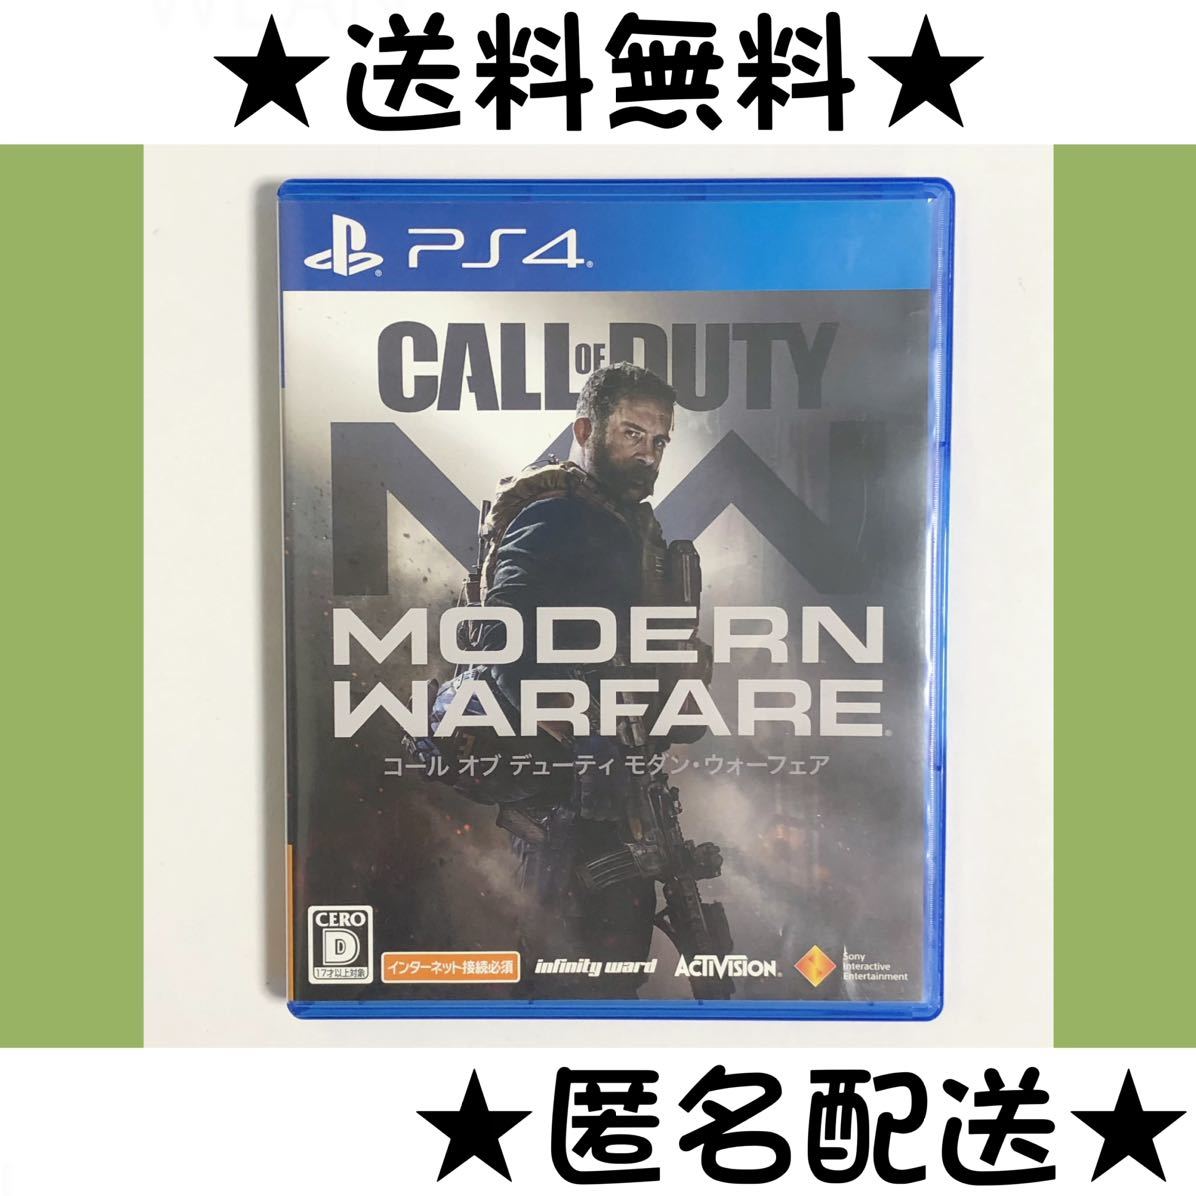 margen Oprigtighed Antologi コール オブ デューティ モダン・ウォーフェア CALL OF DUTY COD MW PS4 中古 送料無料 匿名配送 即決｜PayPayフリマ